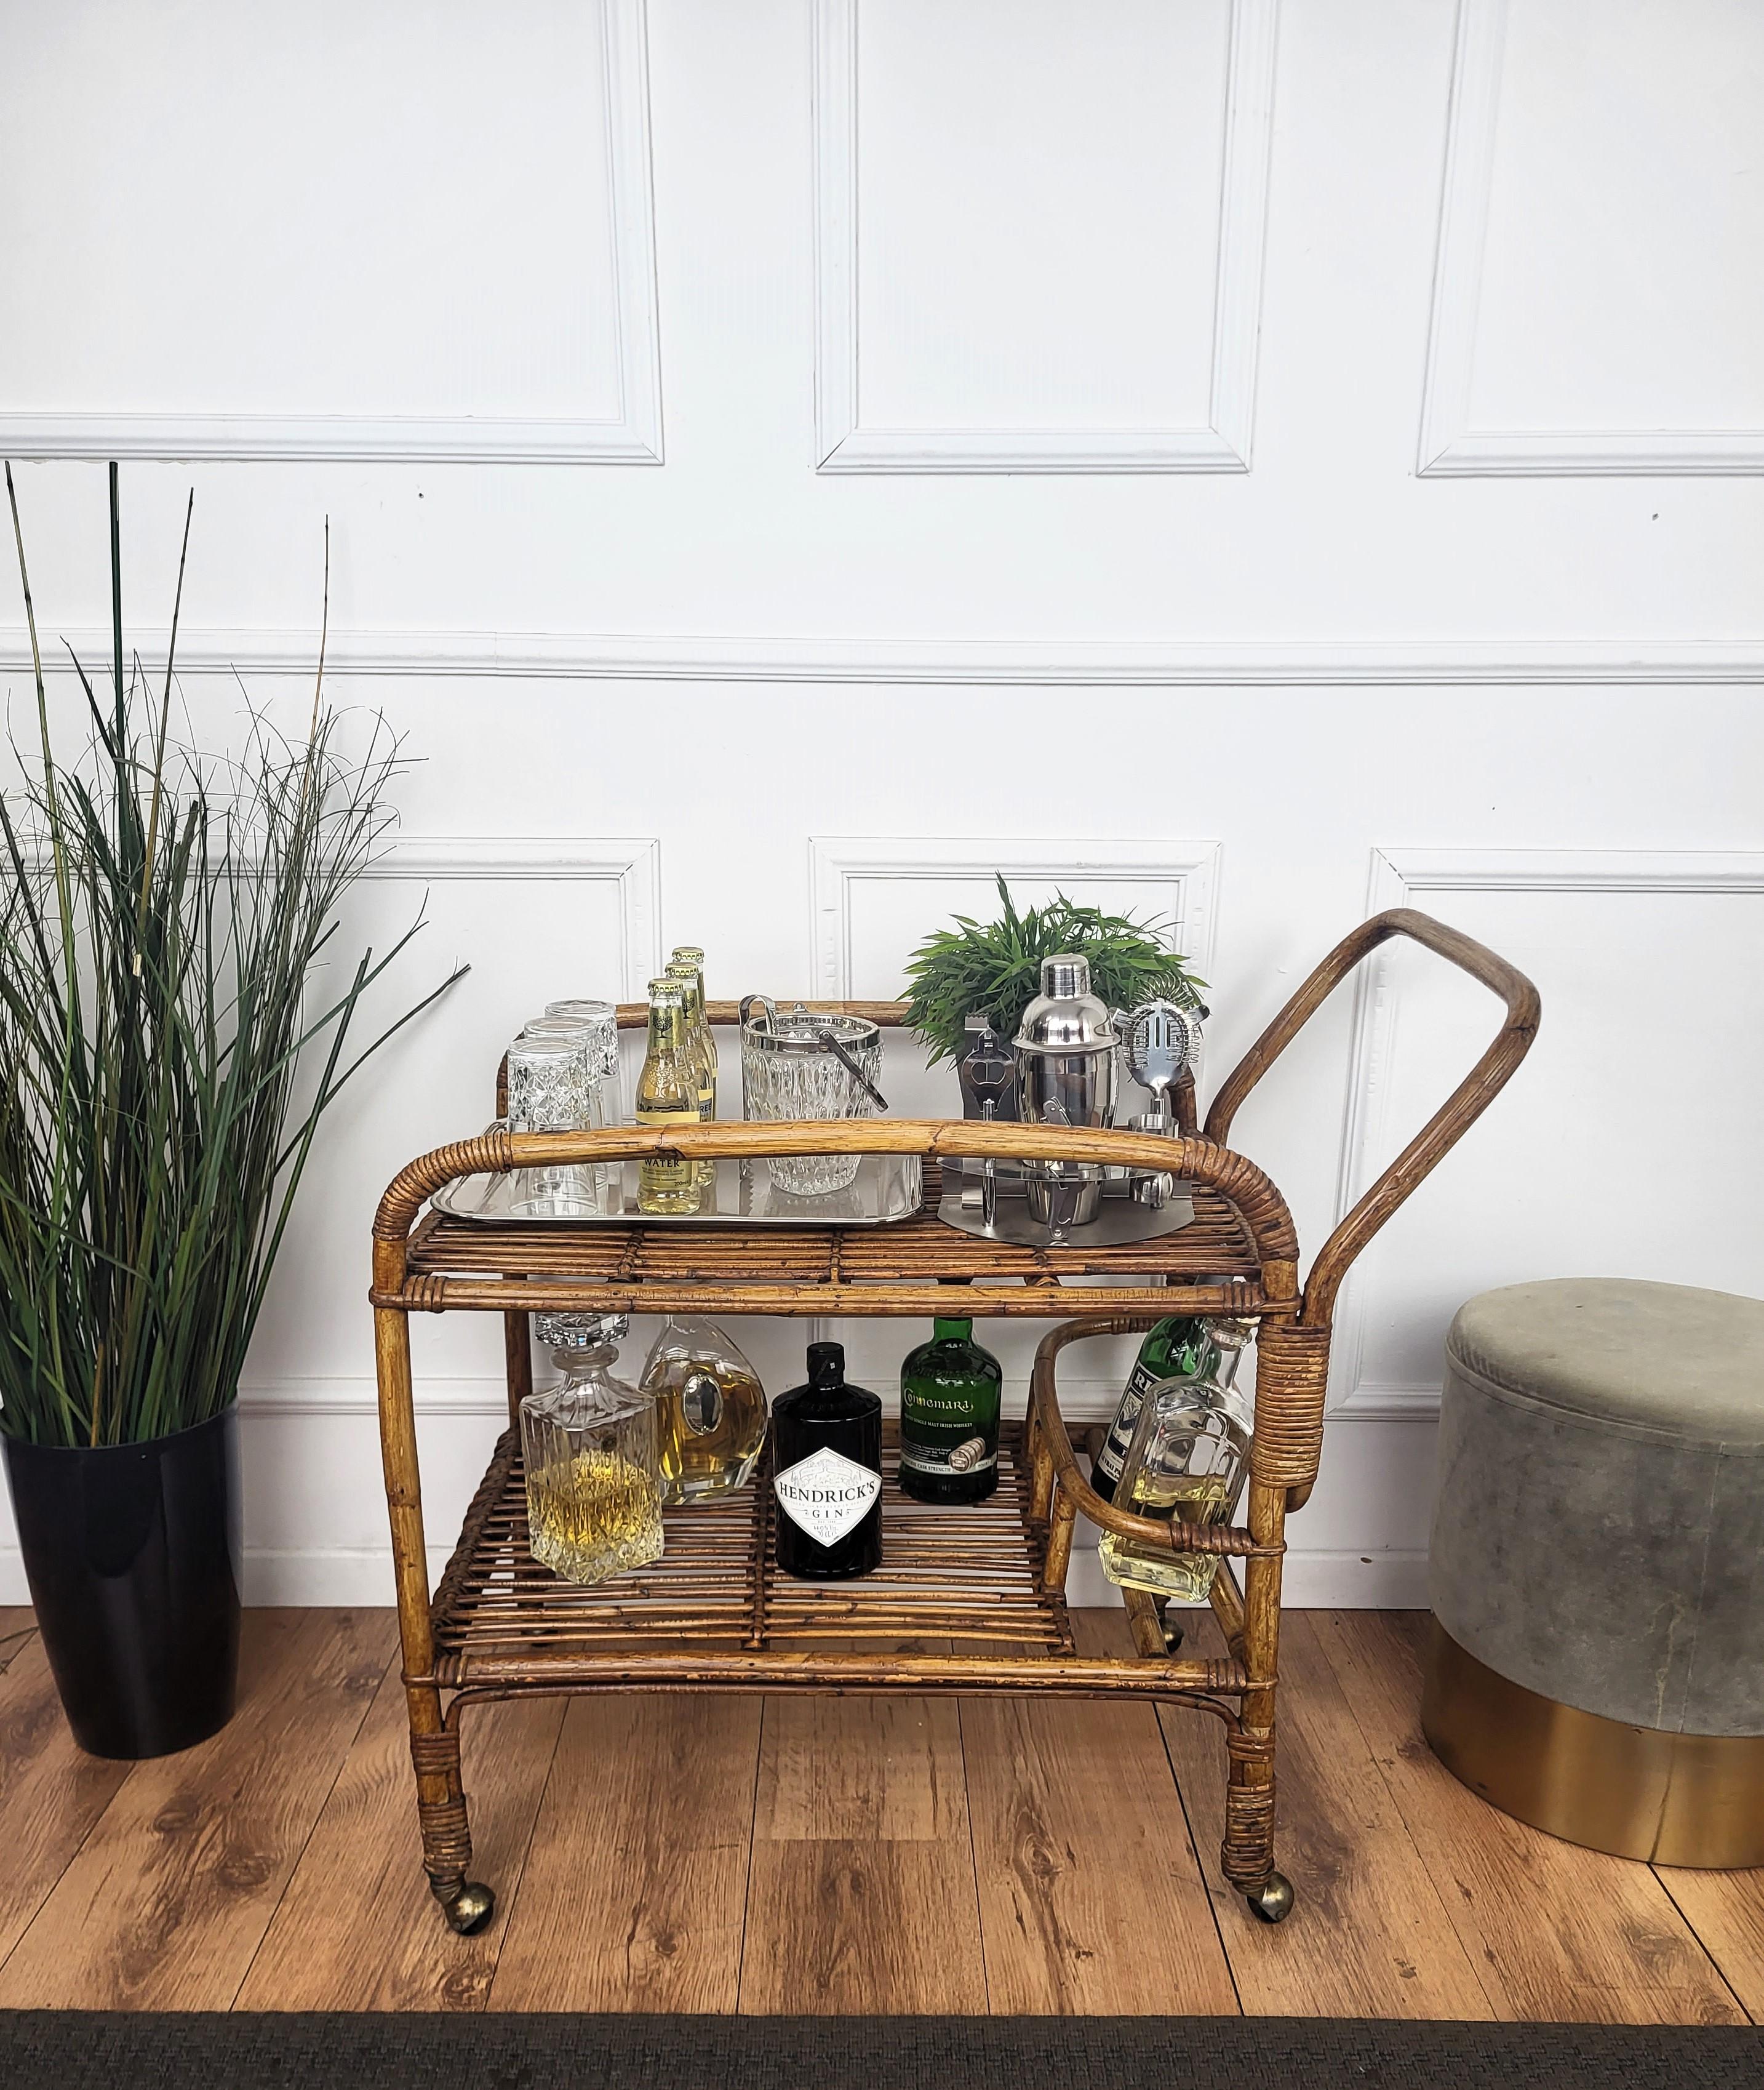 Beautiful 1970s Italian Mid-Century Modern serving bar cart trolley probably by the Italian Vittorio Bonacina featuring two levels and a bottom bottle holder on the side. This charming piece is in the typical style of Franco Albini, Adrien Audoux